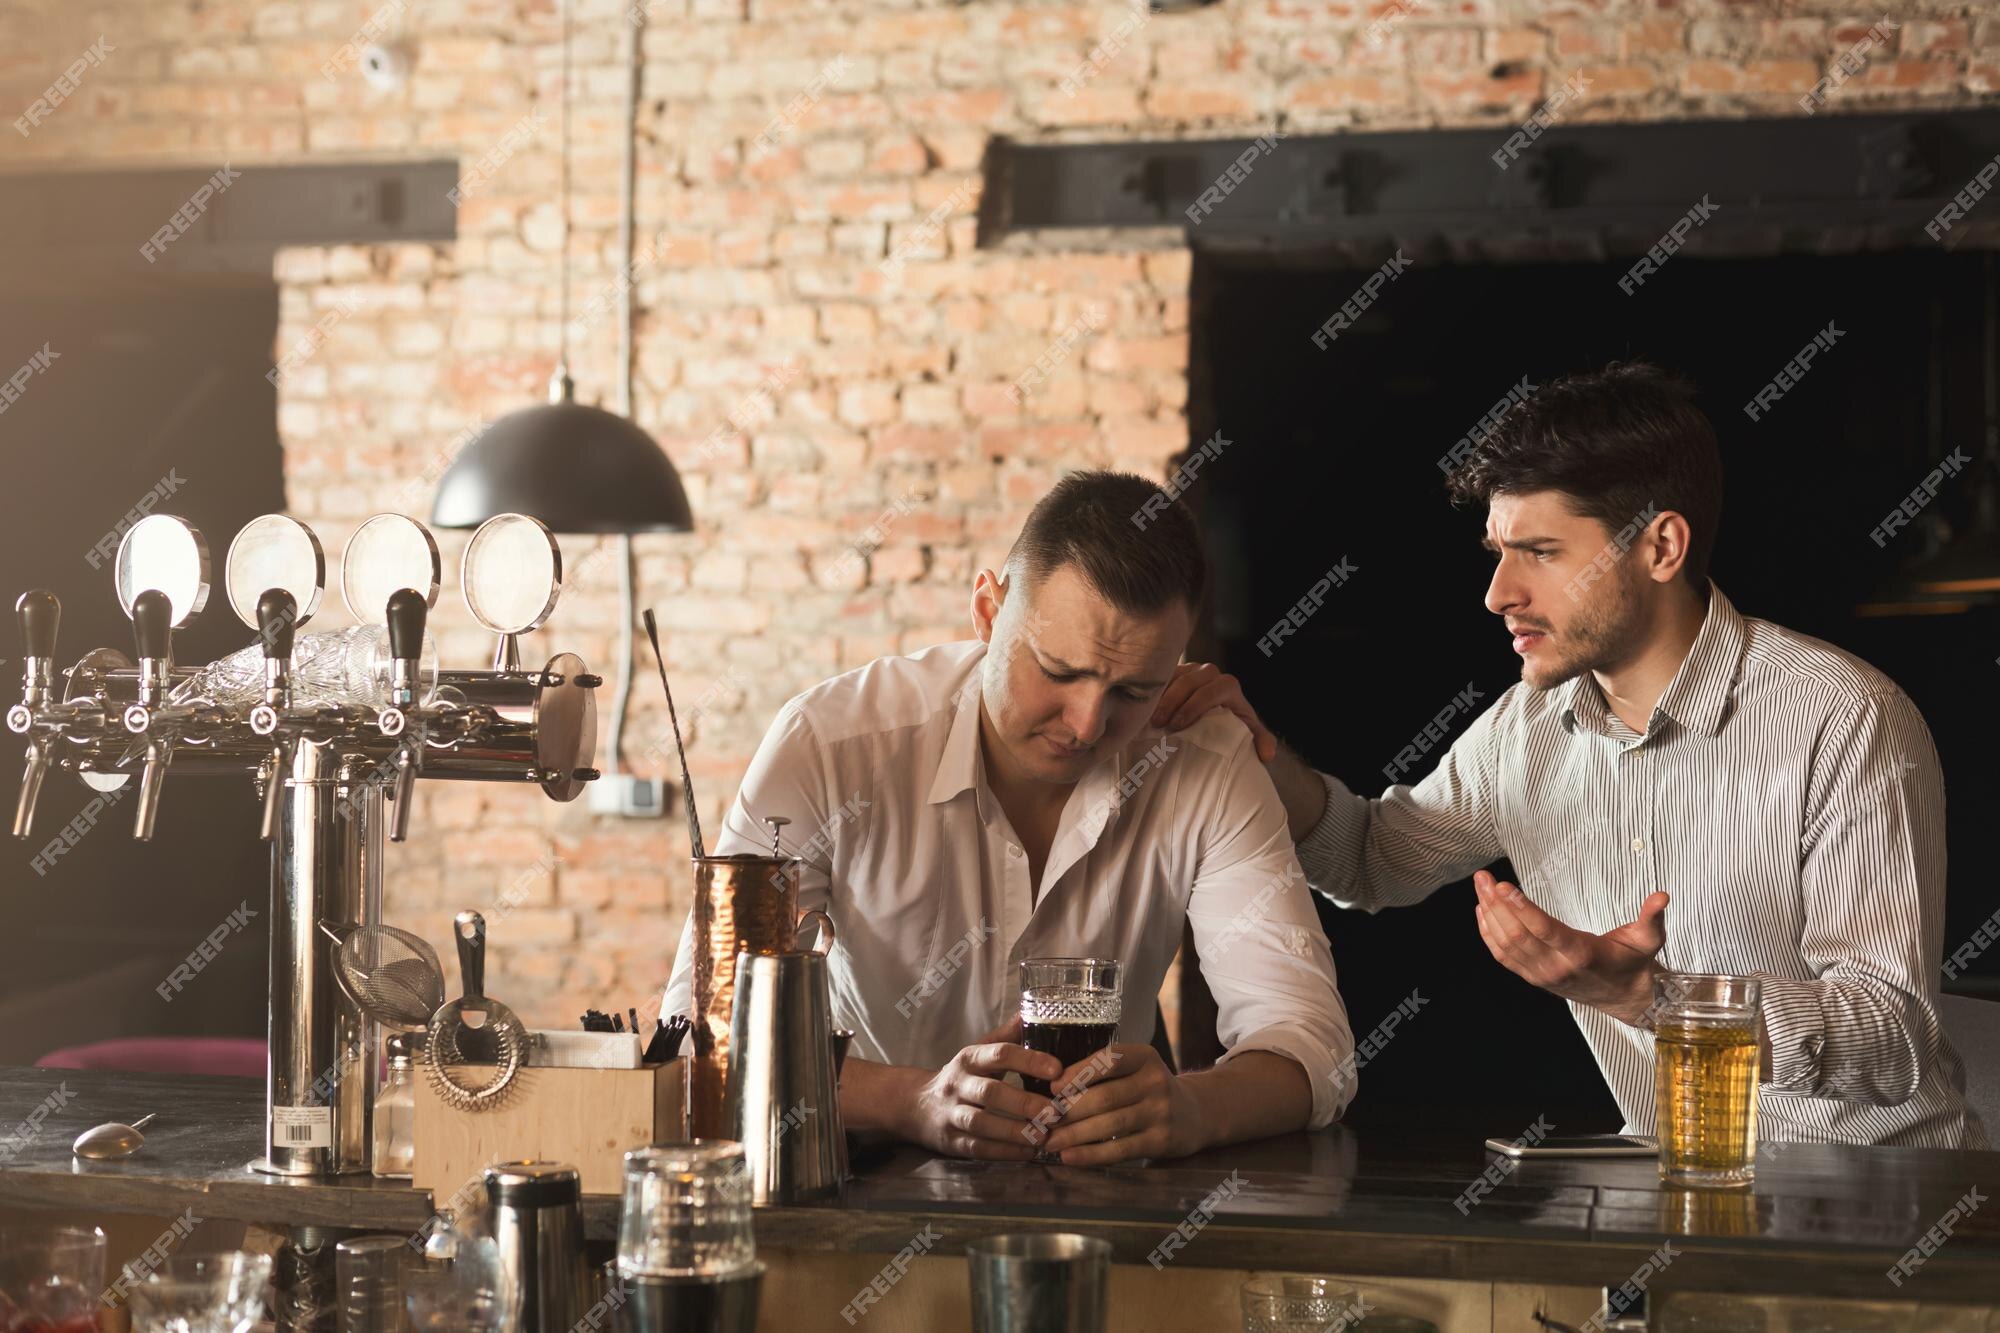 Premium Photo | Consoling his depressed friend. young stressed man sitting  at bar counter, being supported by his friend sitting near him,  relationship issues, copy space